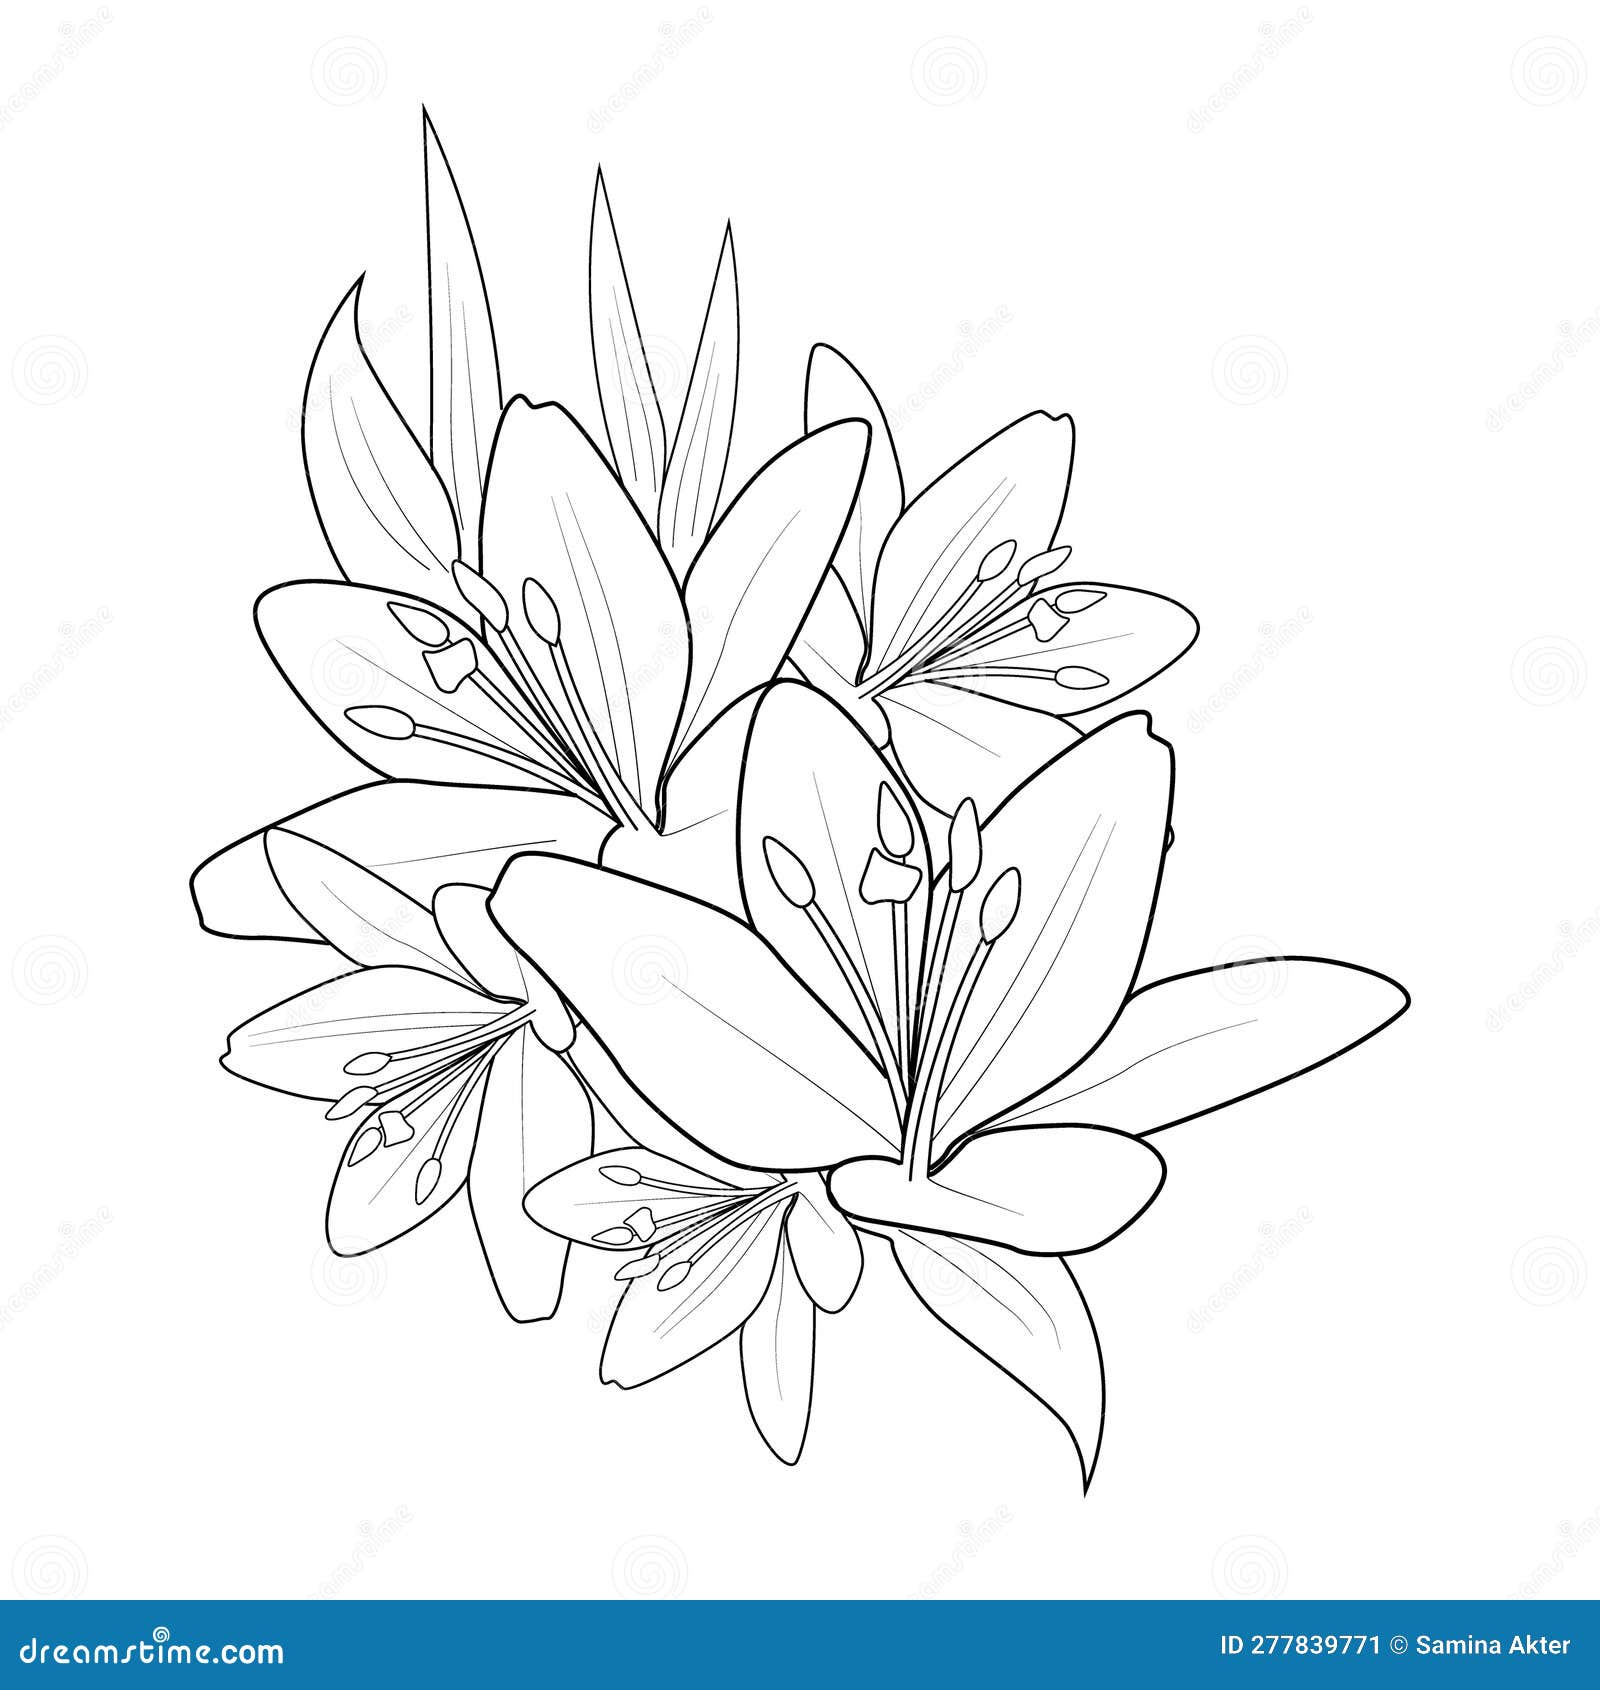 How to Draw a Lily : Step by Step for Beginners - JeyRam Drawing Tutorials